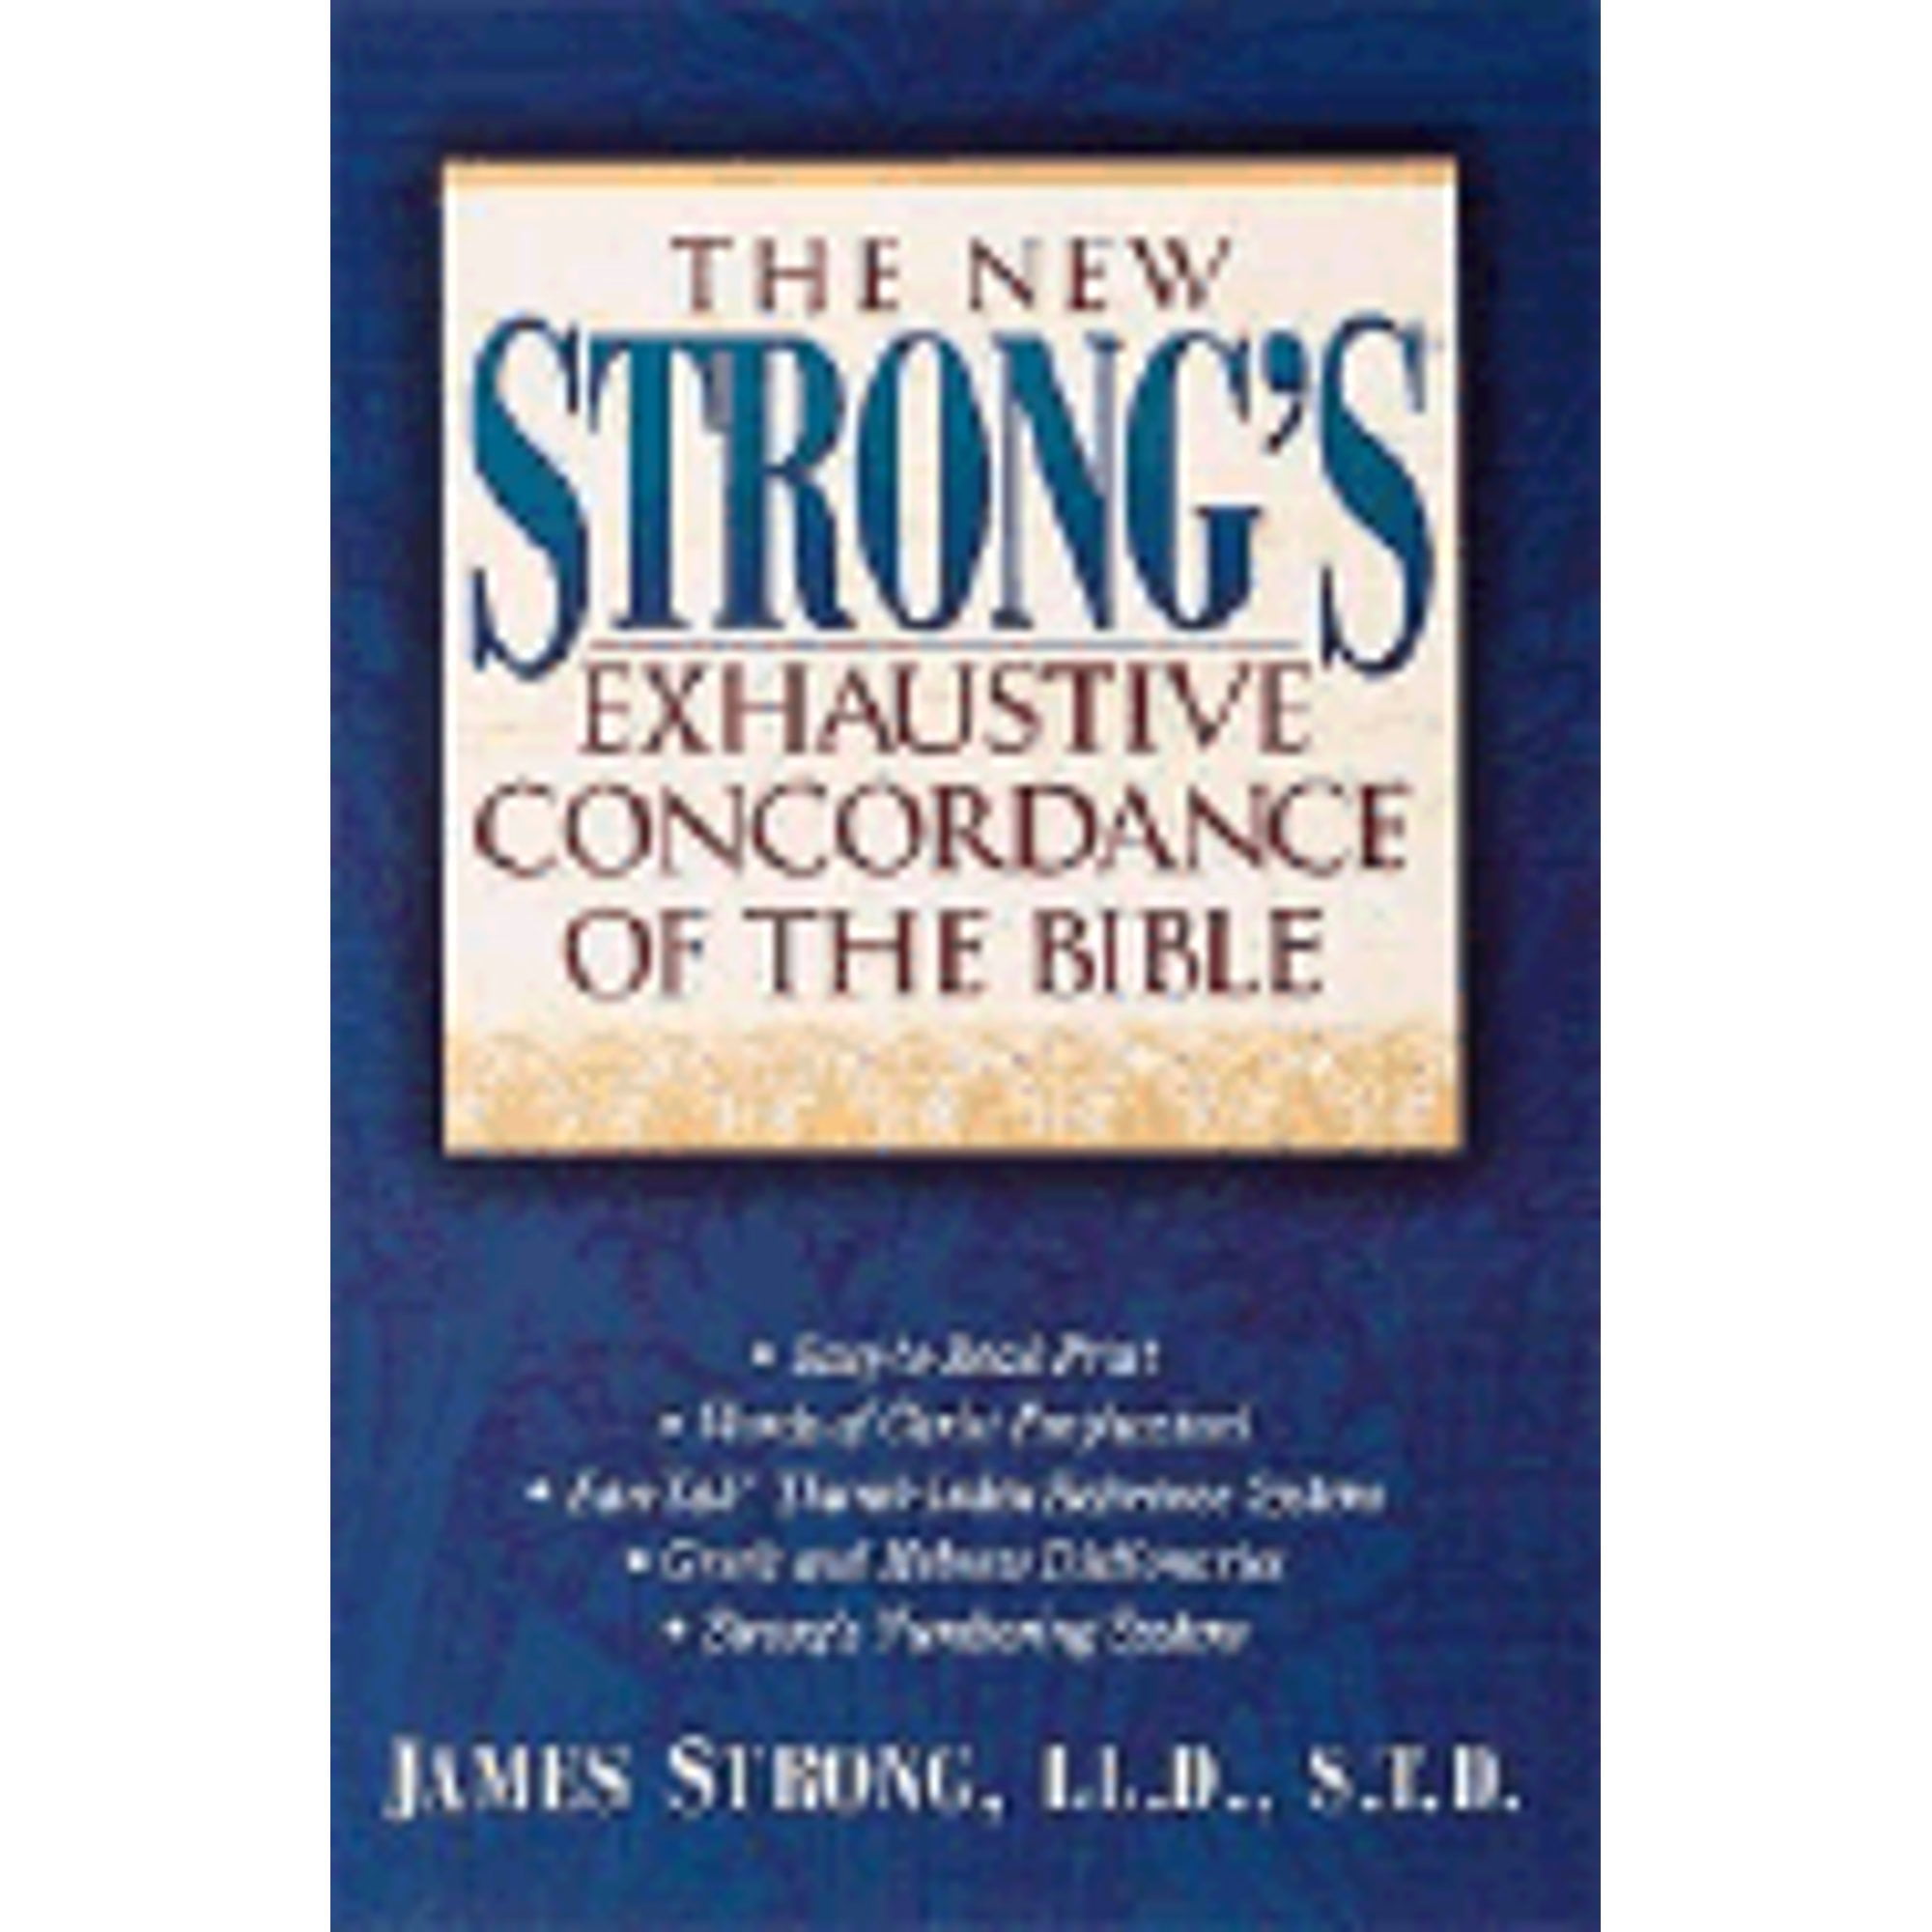 Pre-Owned The New Strong's Exhaustive Concordance of the Bible: Super Value Edition (Hardcover 9780785211952) by Thomas Nelson Publishers, James Strong